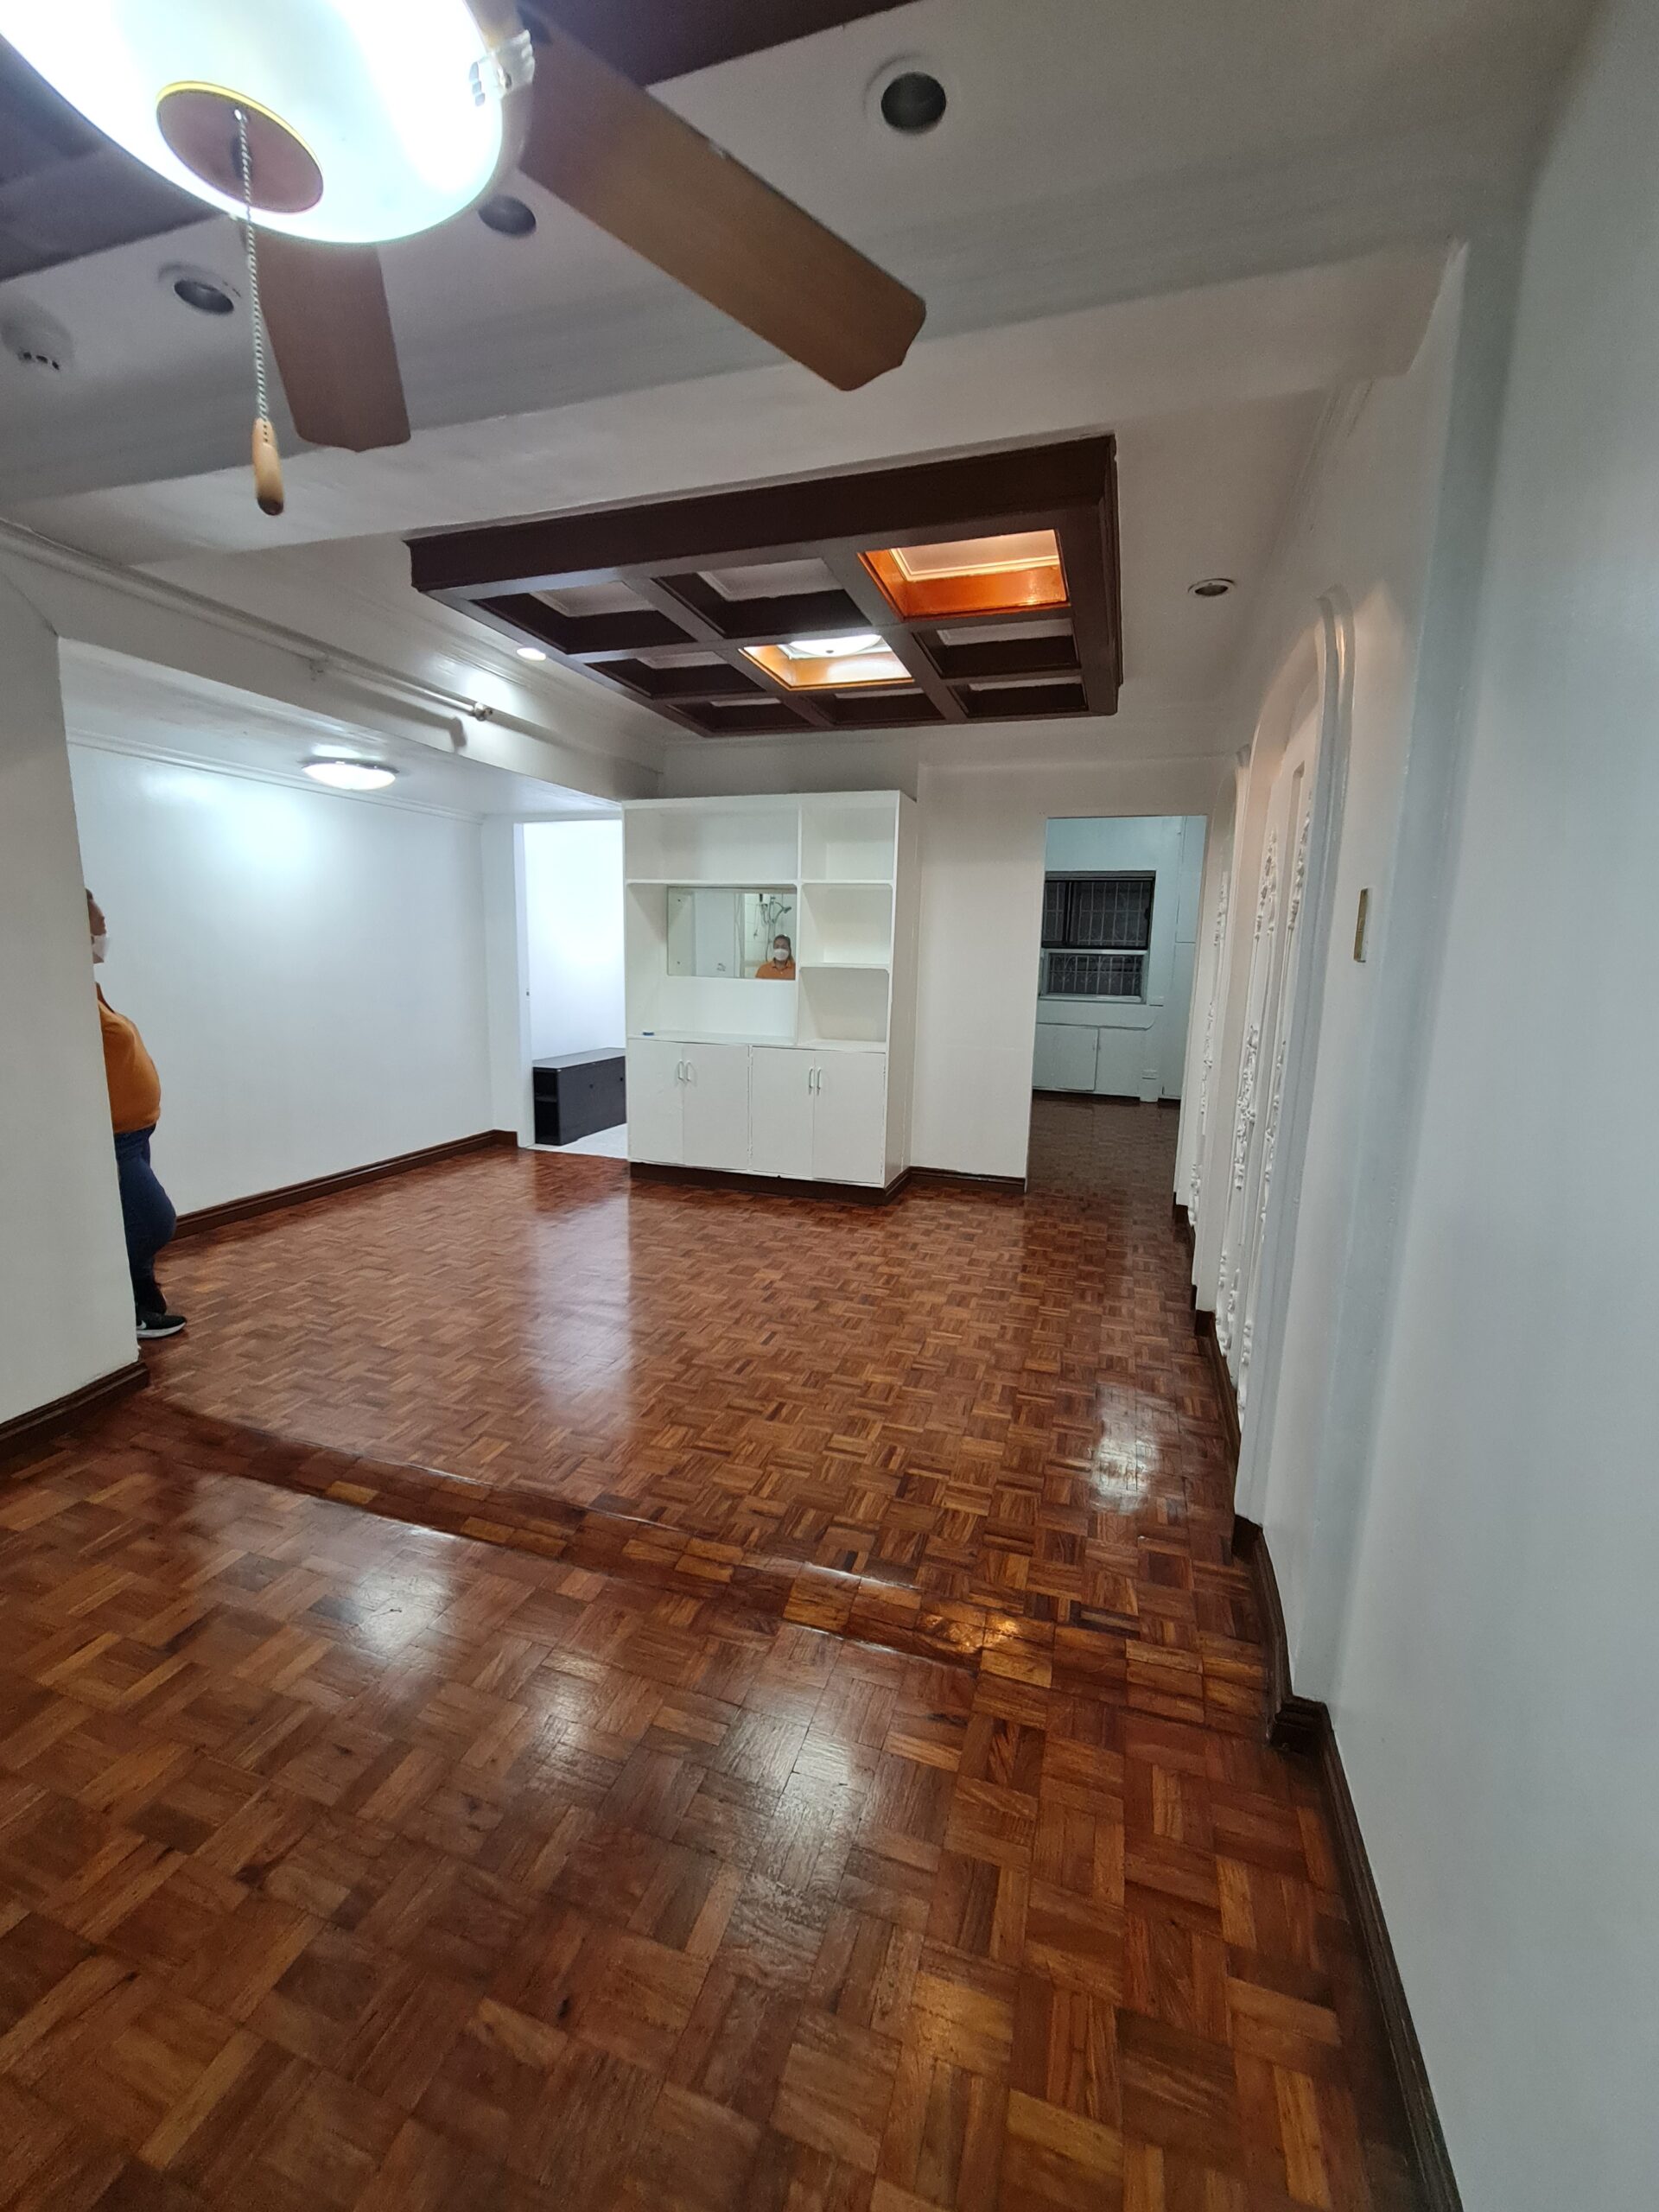 1 bedroom for rent in Annapolis Greenhills